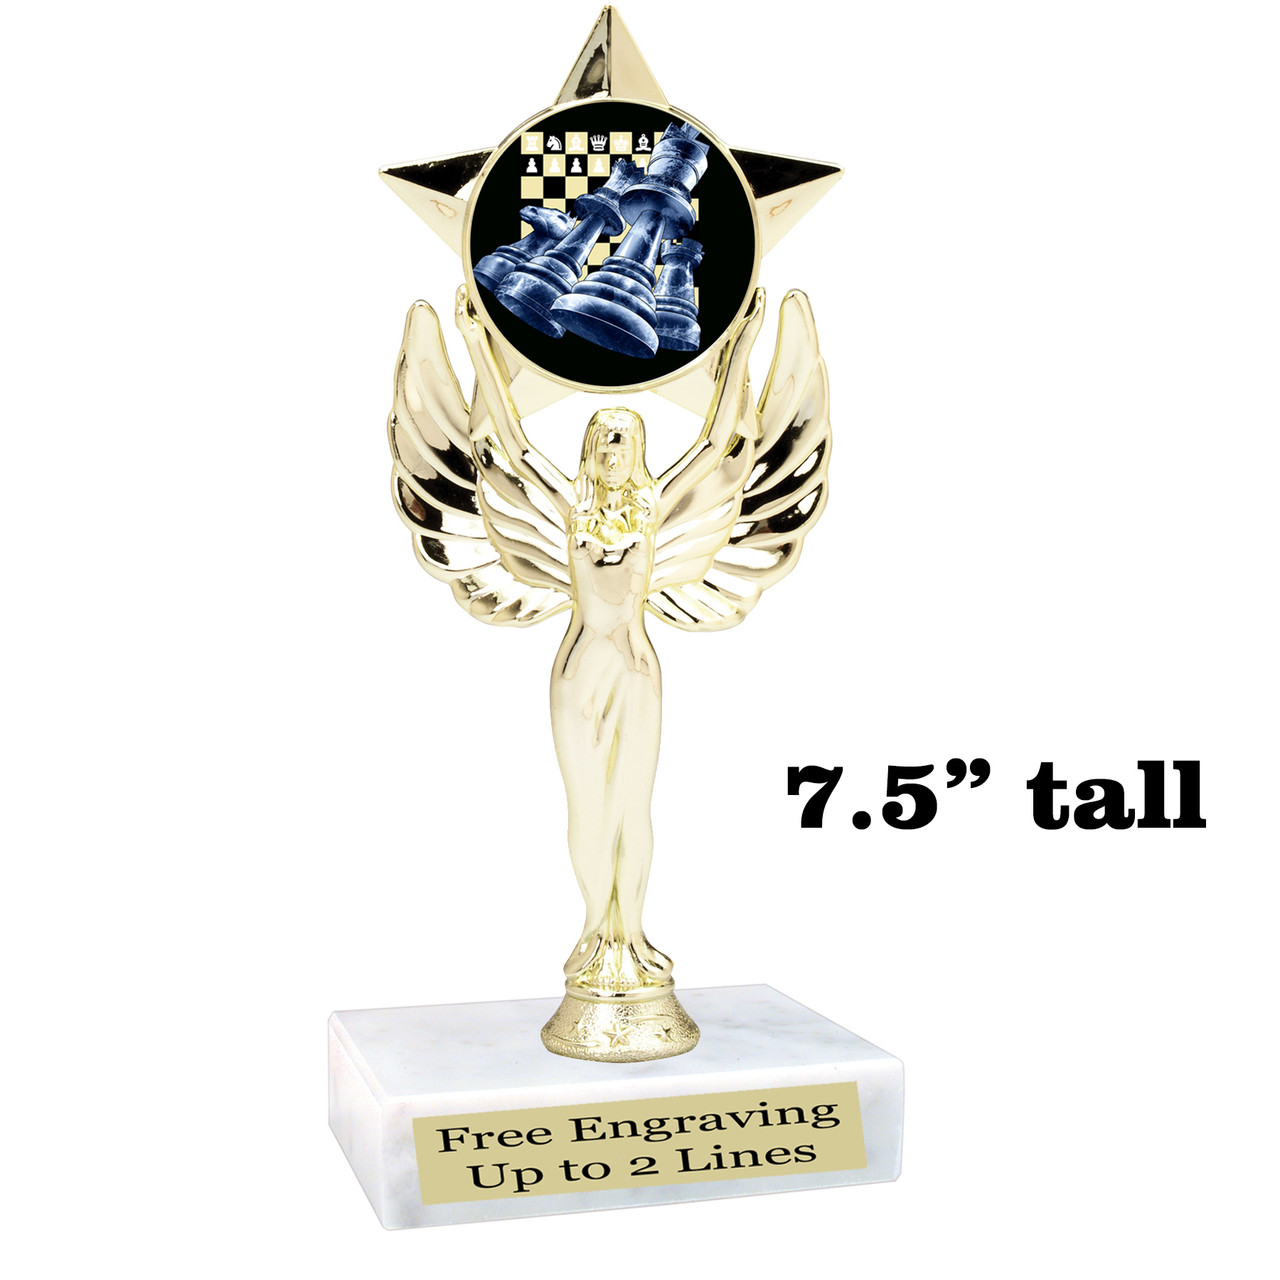 BINGO! trophy. 6tall with choice of insert design. Great award for your  Bingo games and Family Game Nights! 7517